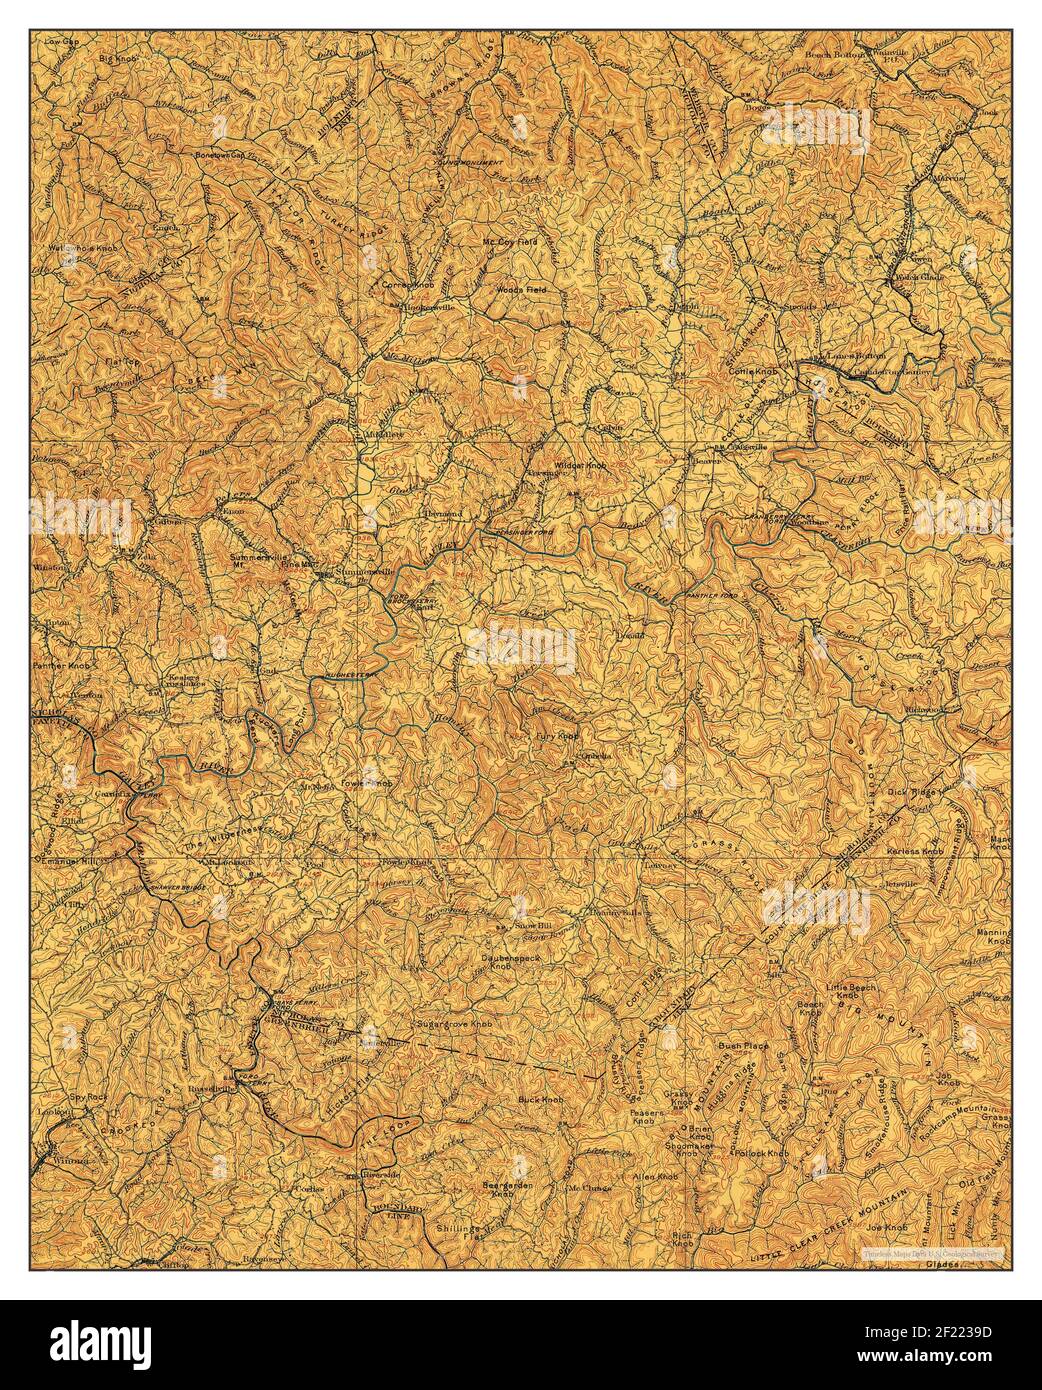 Nicholas, West Virginia, map 1901, 1:125000, United States of America by Timeless Maps, data U.S. Geological Survey Stock Photo